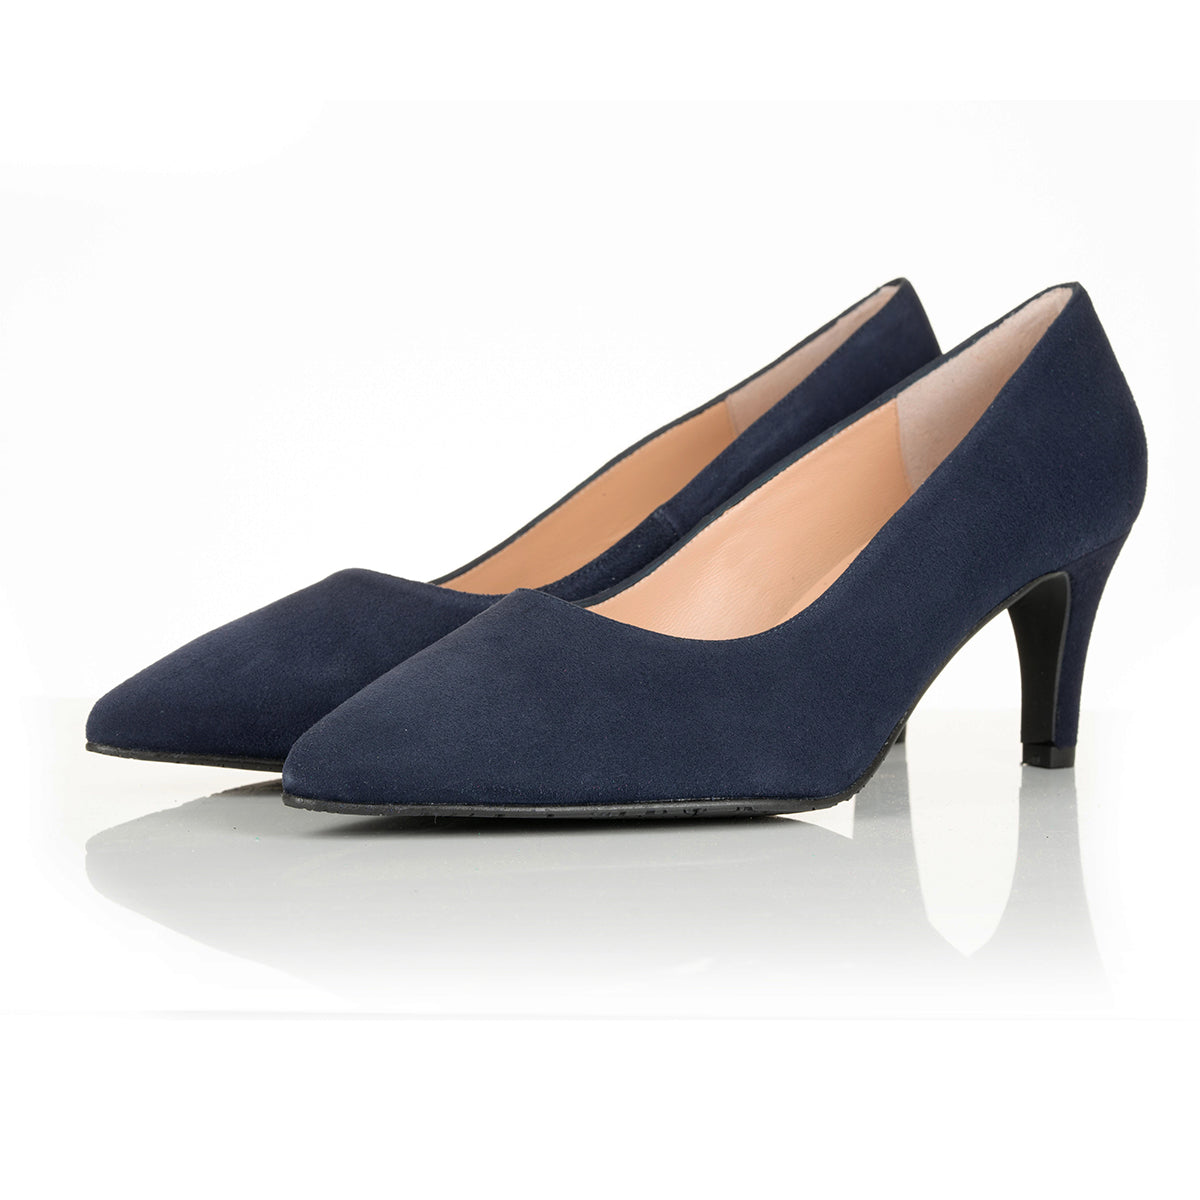 Wide Fit Navy Suede Court Shoes – Sargasso and Grey